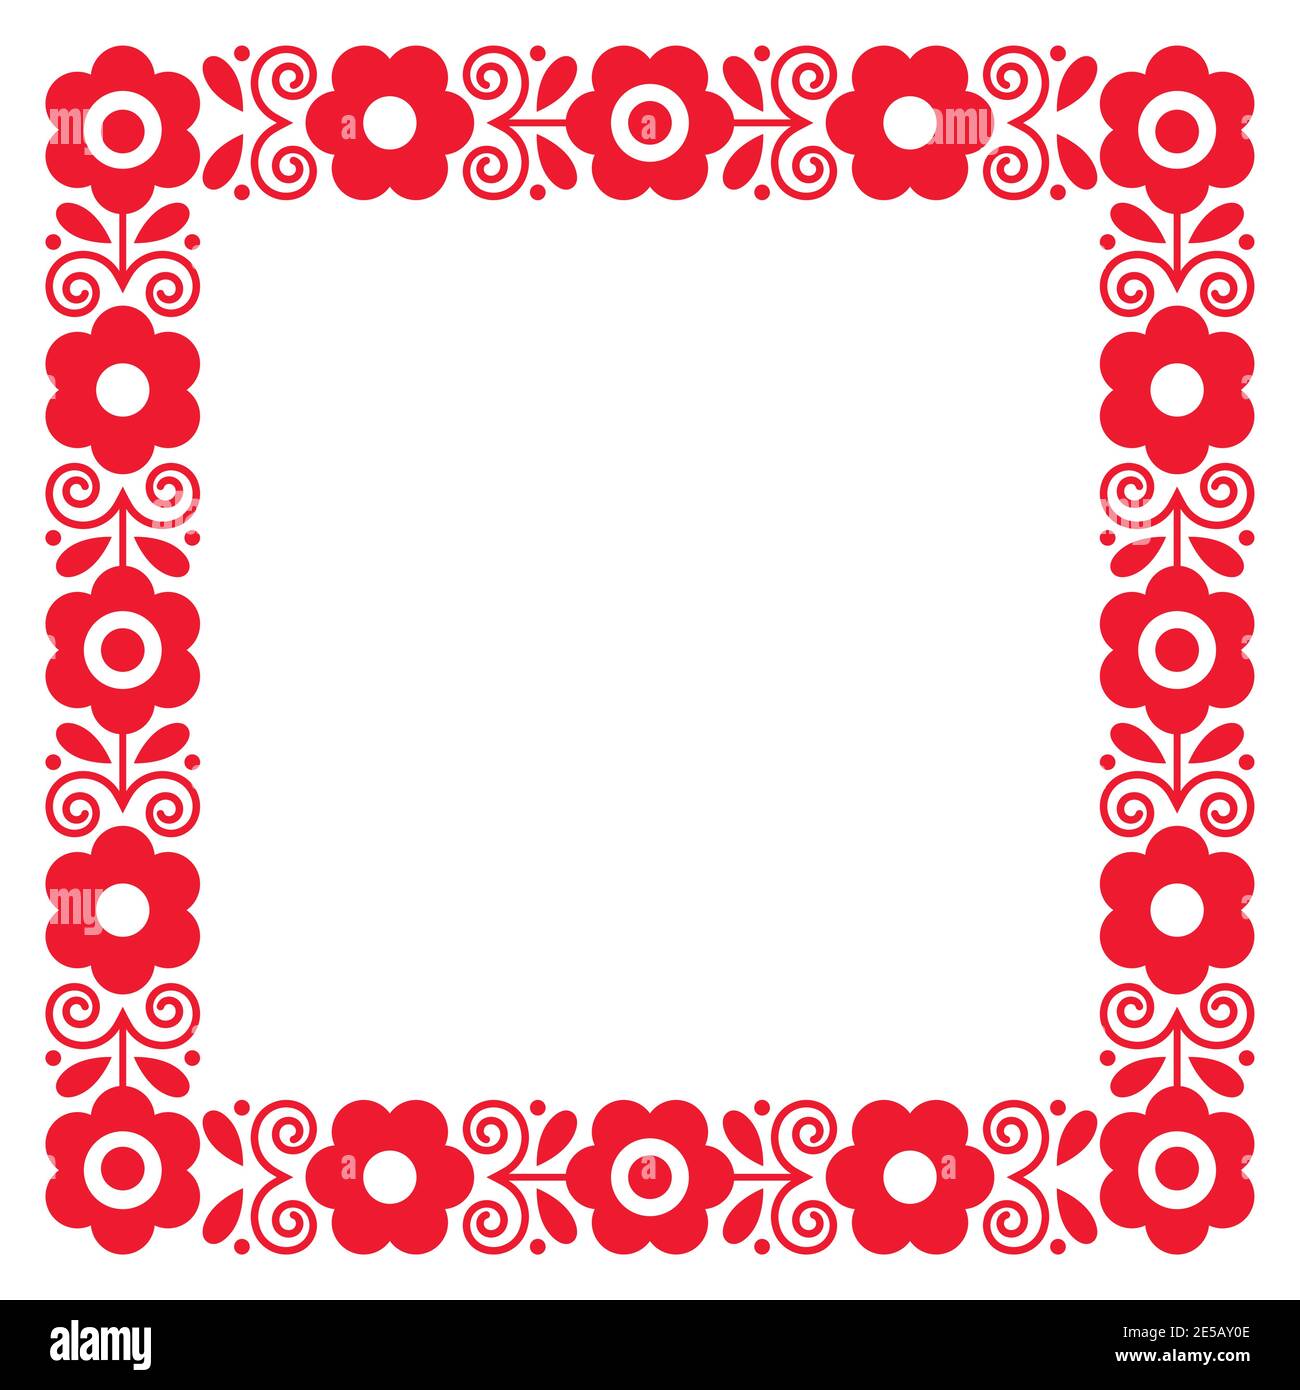 Polish floral folk art cute square frame vector design, perfect for greeting card or wedding invitation Stock Vector